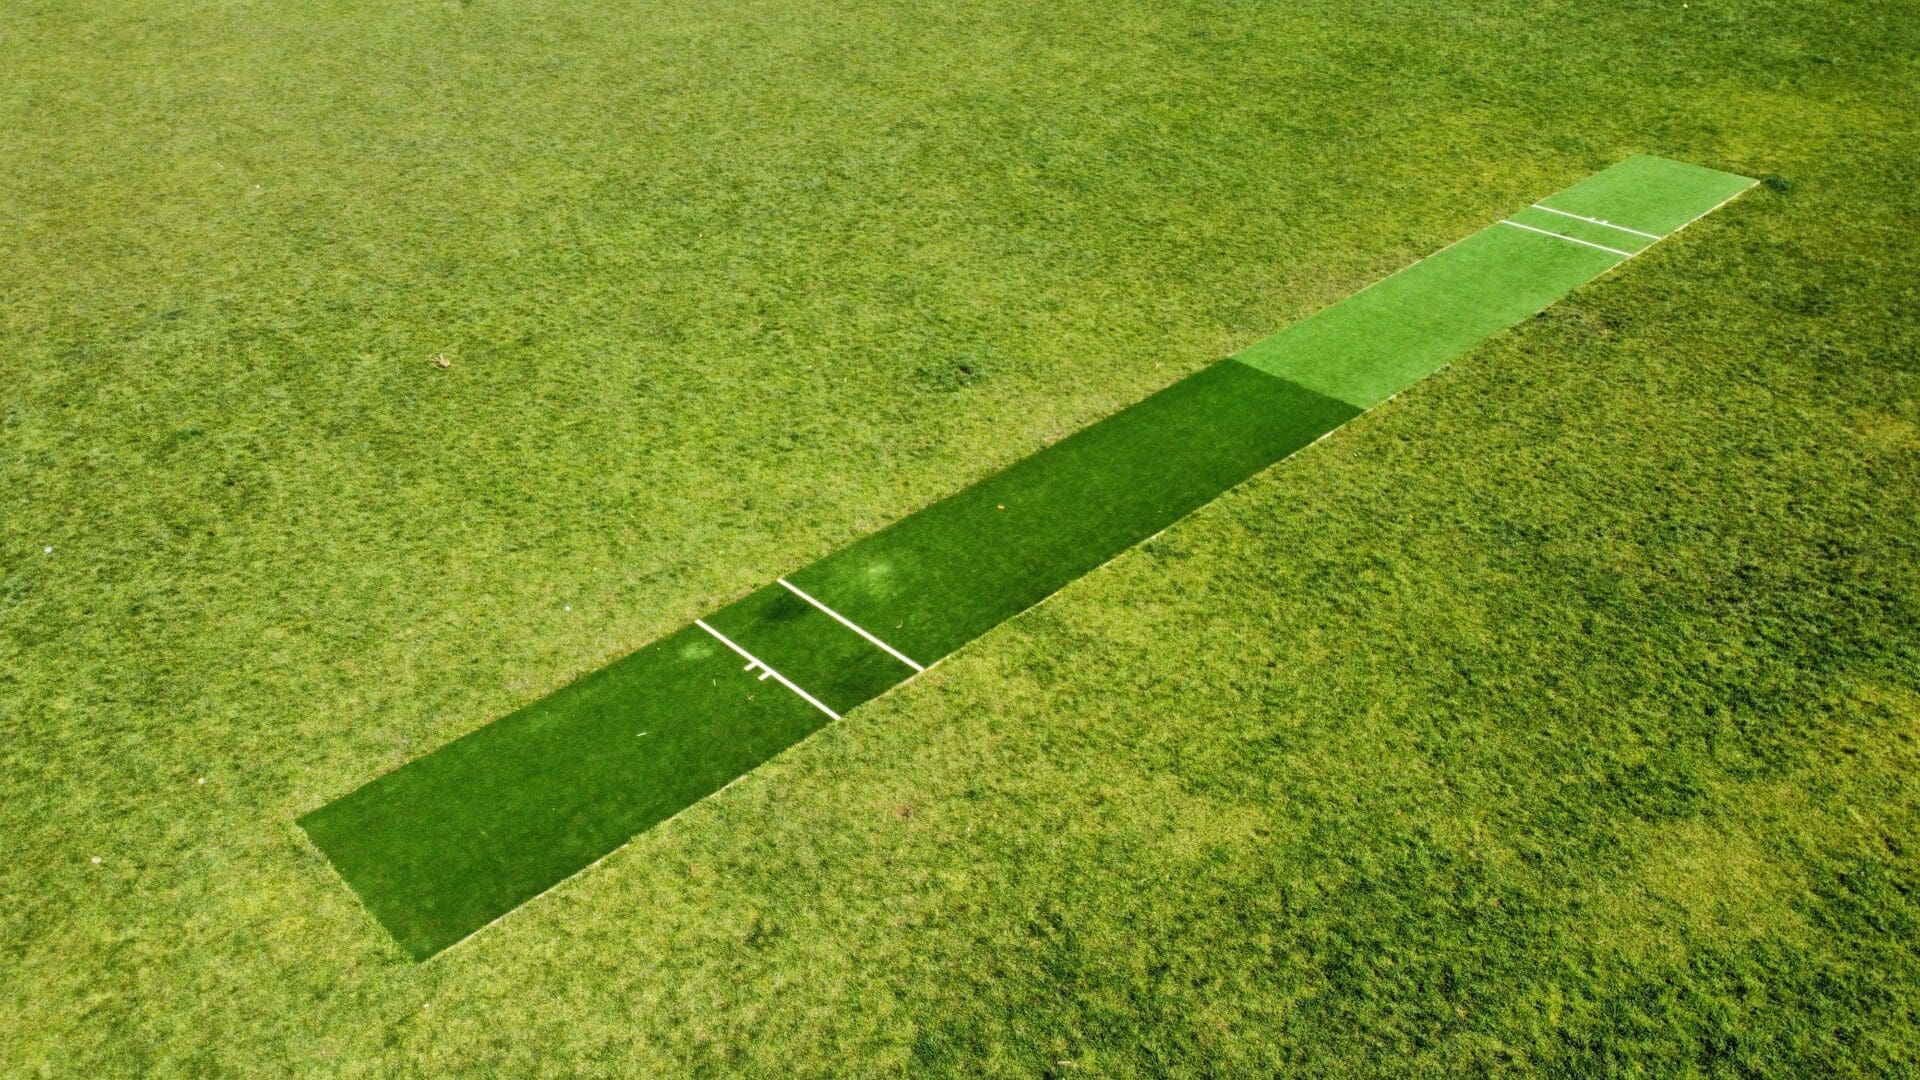 The school cricket wicket looks splendid and is a high-performance, durable cricket wicket